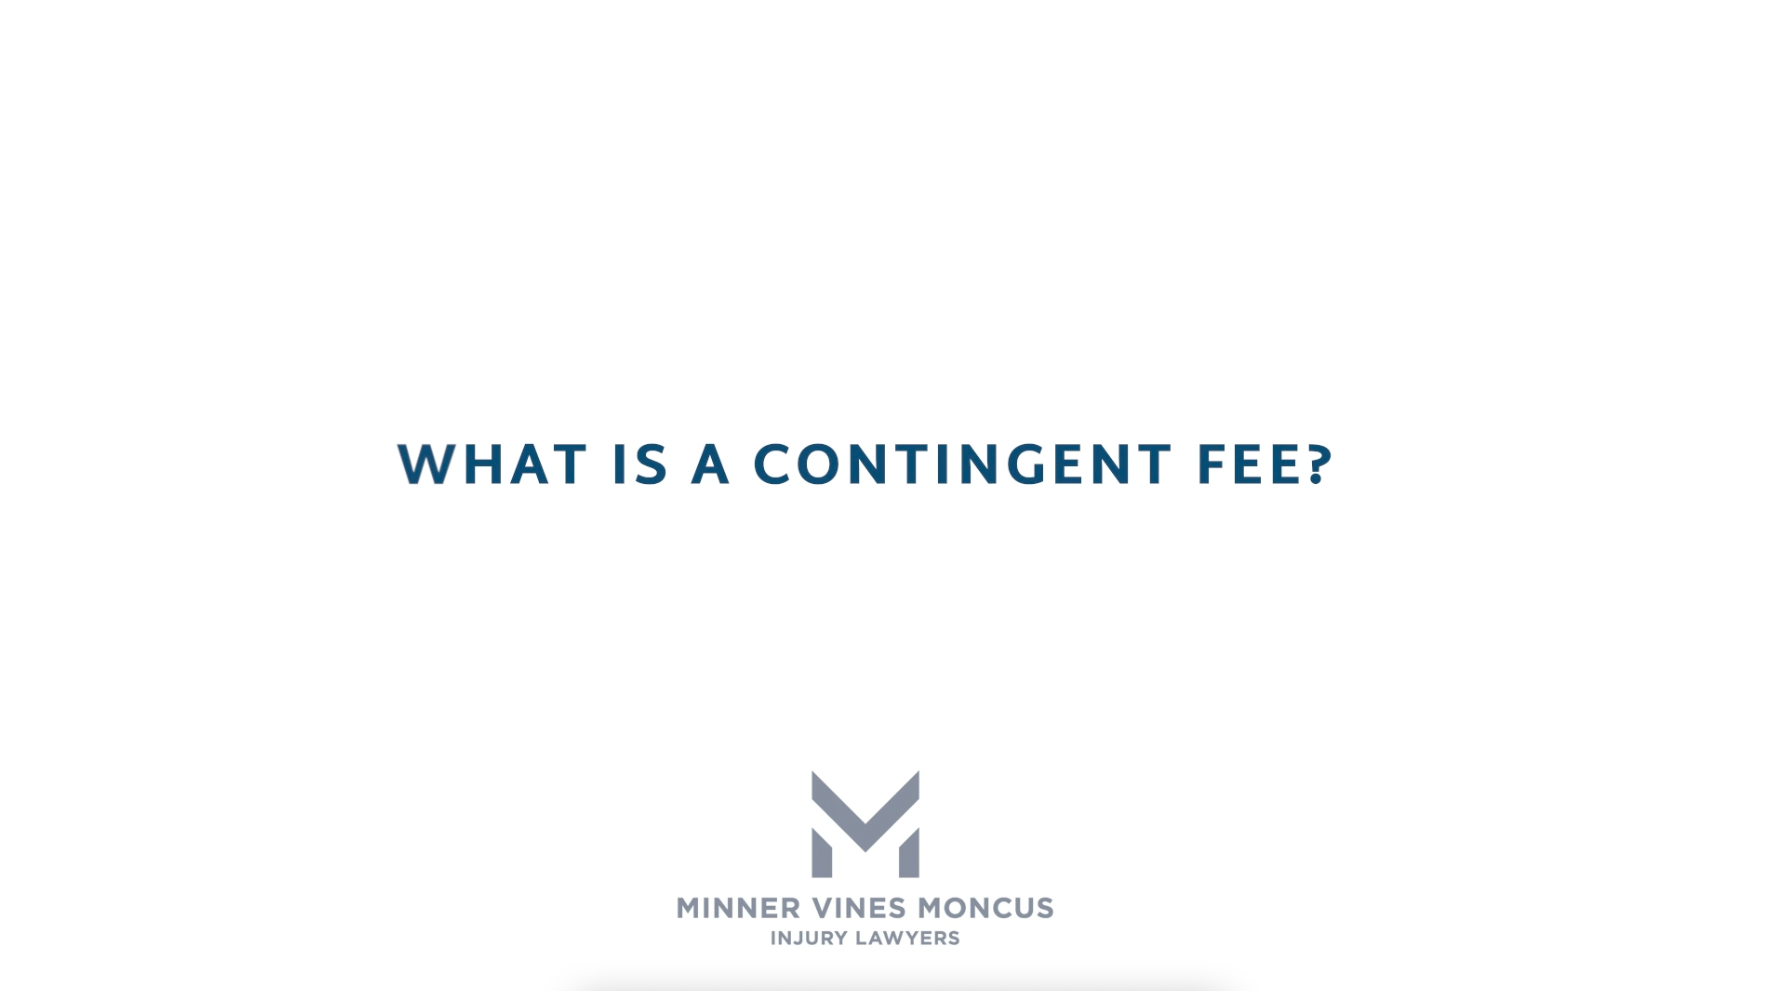 What is a contingent fee?